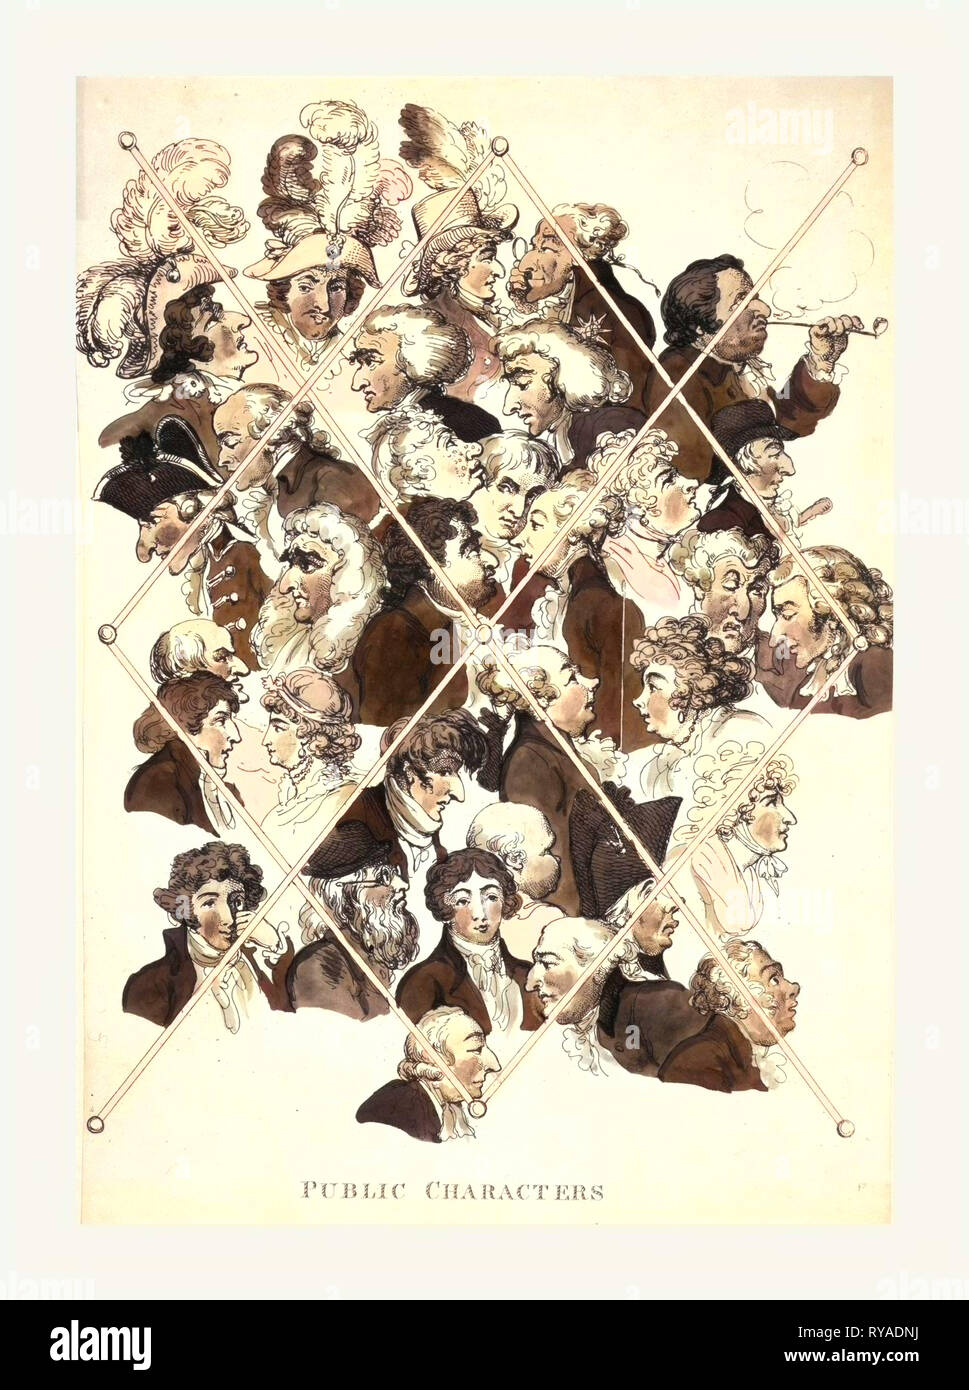 Public Characters, Rowlandson, Thomas, 1756-1827, Engraving 1801, Heads of Well-Known People, Arranged in a Medley, Placed behind Lines Intersecting Diagonally which Simulate Crossed Tapes Forming a Rack for Cards or Letters. In the Center Are Fox and Pitt Facing Each Other. Between Them, Tierney Looks Out with a Sly Expression. Among Others Are Richard Sheridan, Burdett, George Grenville, Sarah Siddons, George Hanger, John Kemble, Lady Archer, Queensberry, Lord Hood, Van Butchell, Derby, Lord Moira, Etc Stock Photo